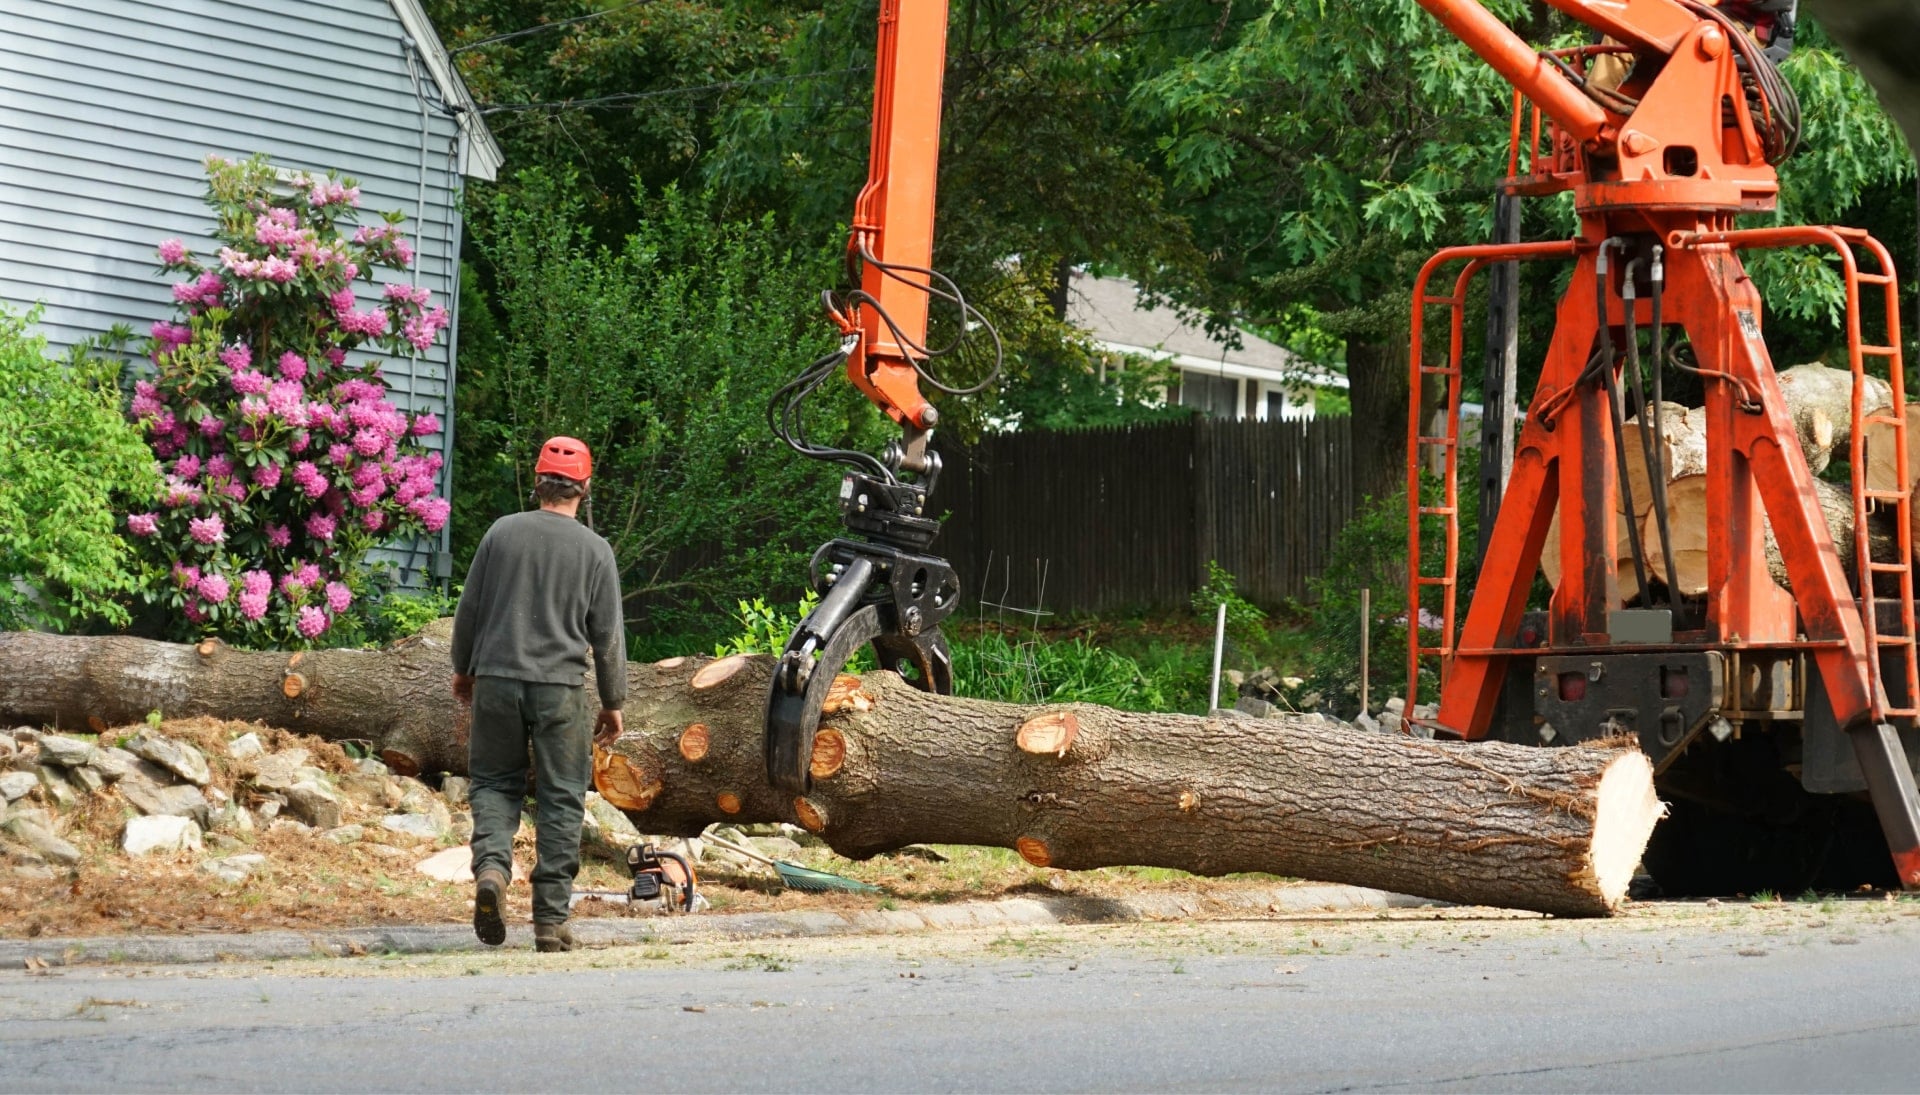 Heavy machinery is used to remove a tree after cutting in a {city} yard.